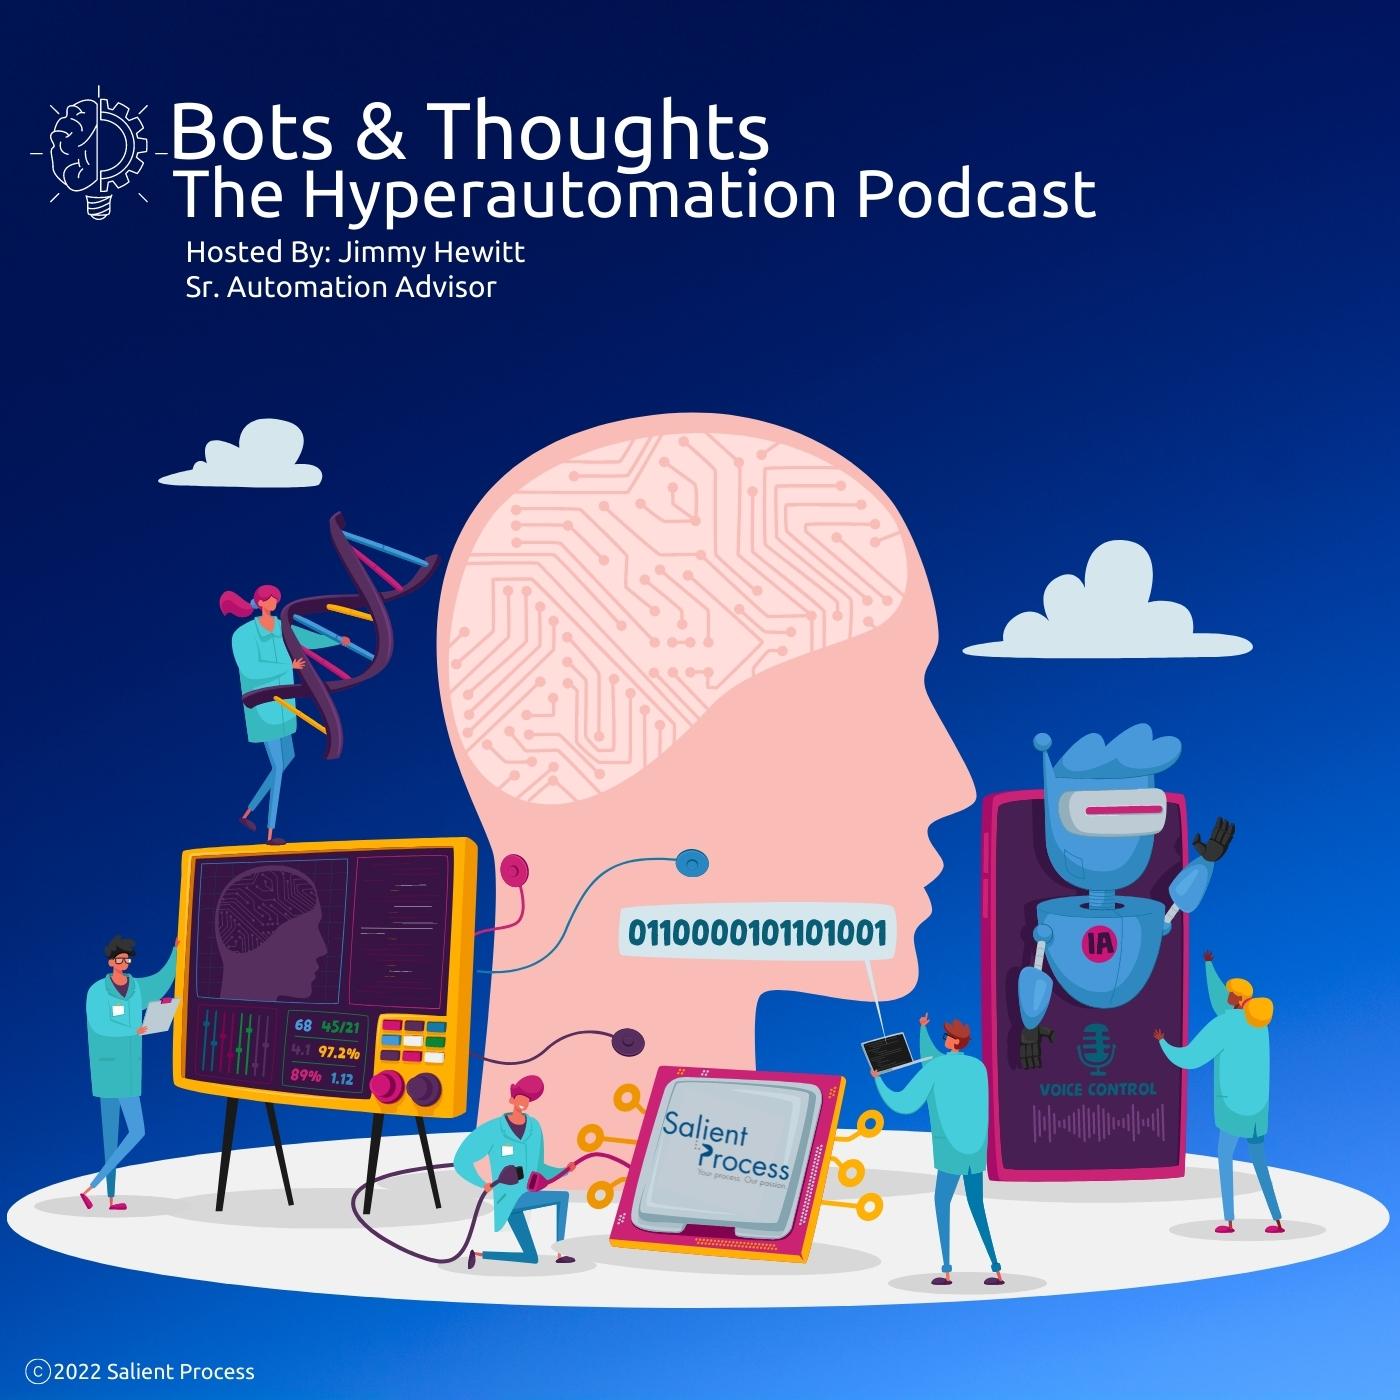 Salient Process - Bots & Thoughts: The Hyperautomation Podcast - Cover Art